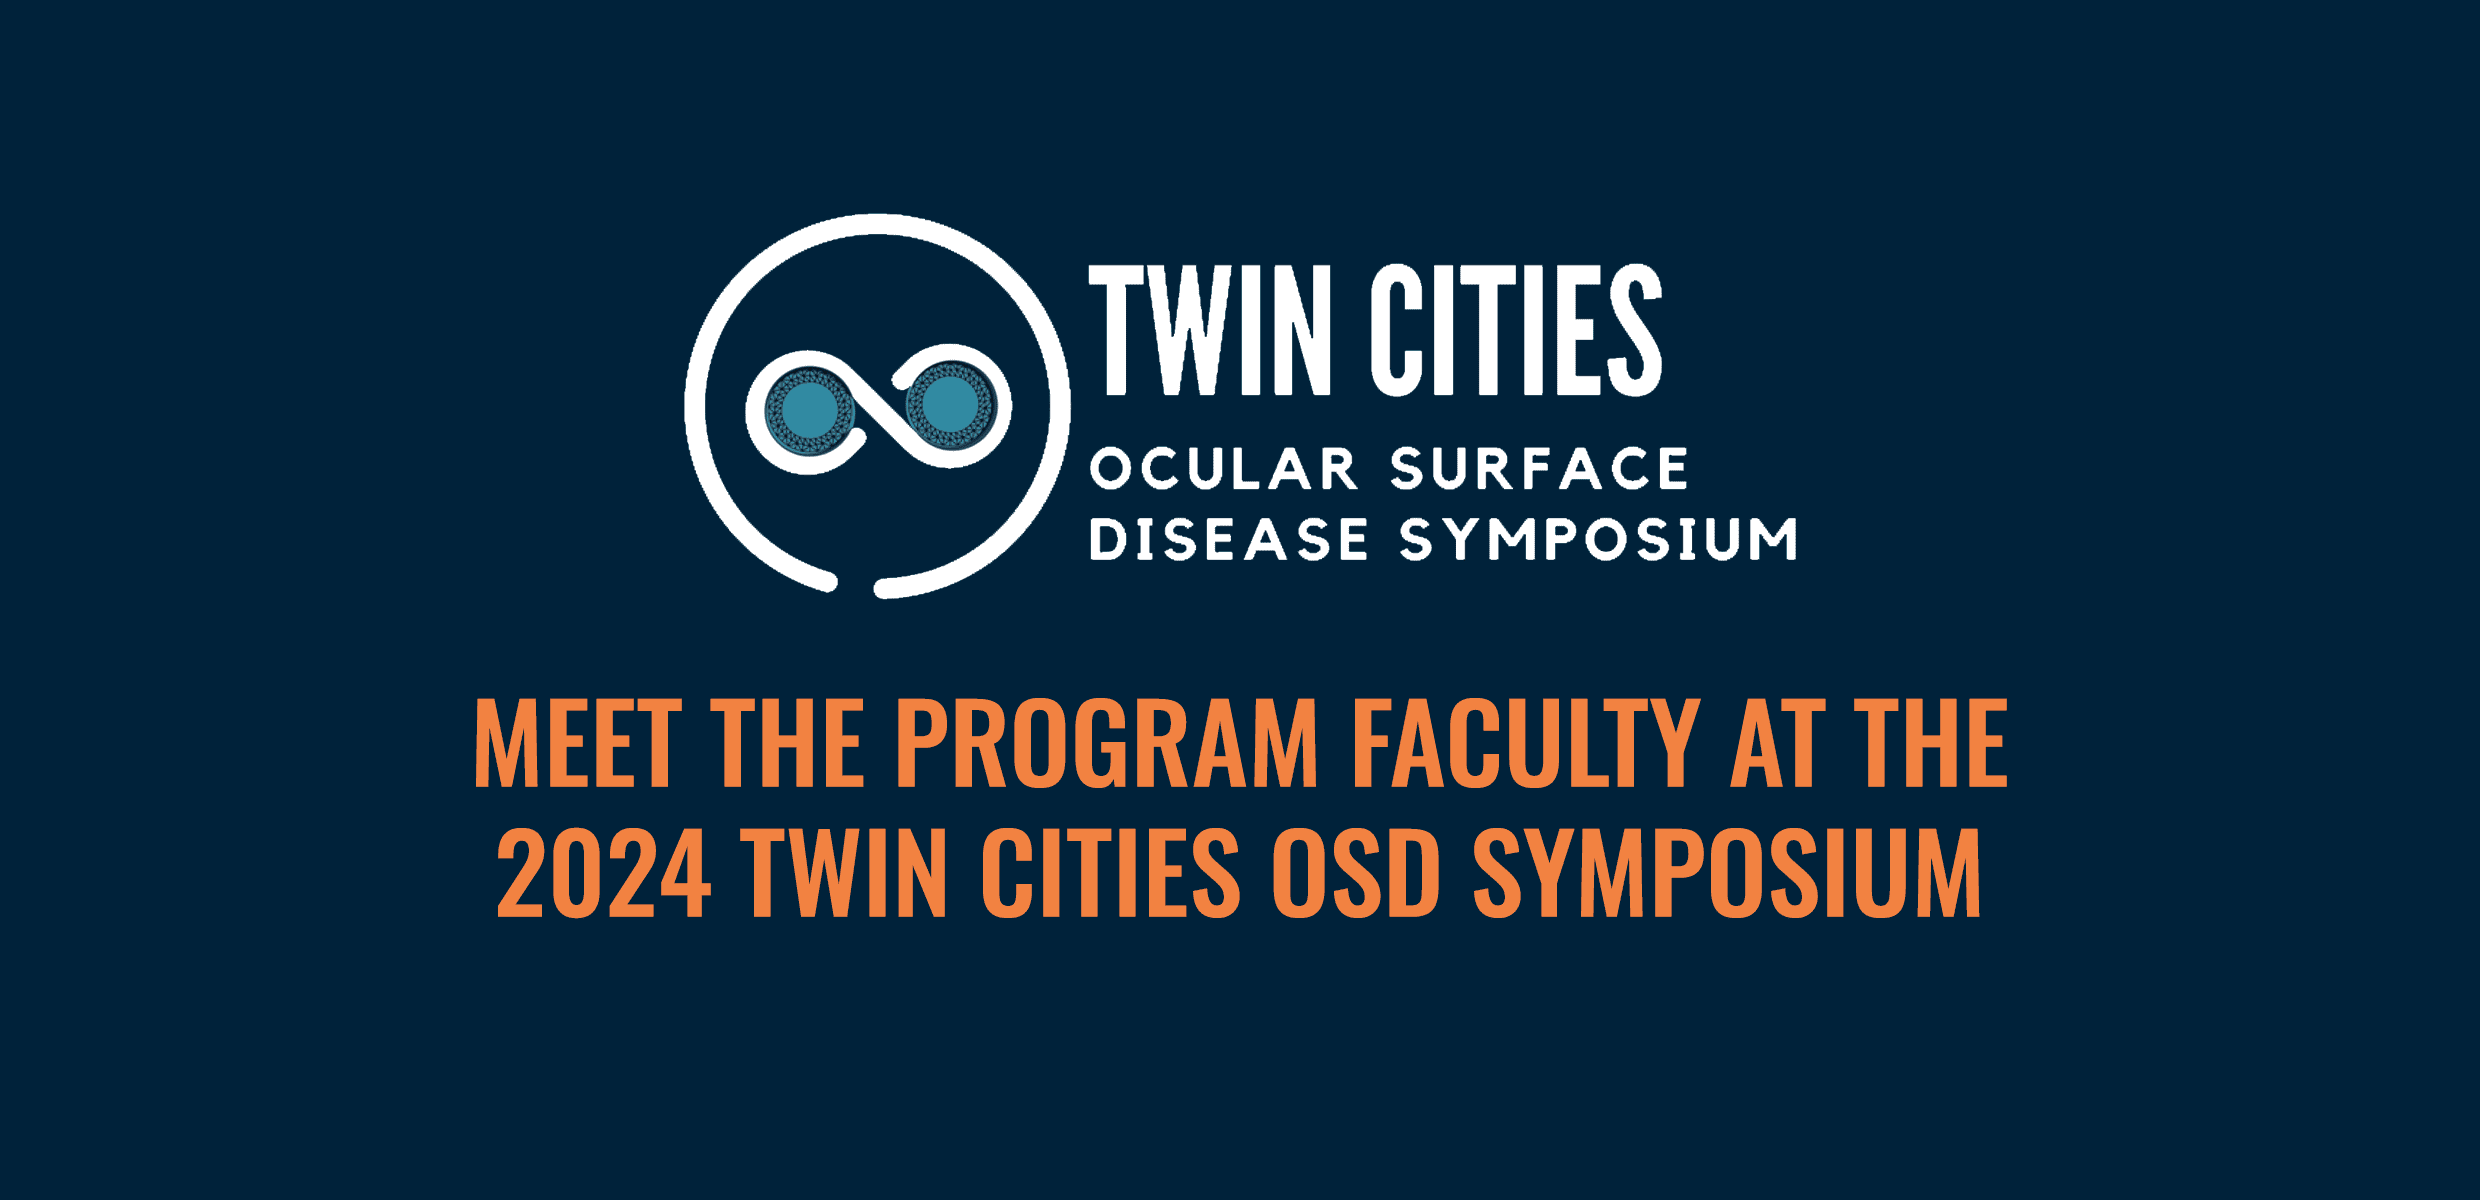 Get to Know the Program Faculty for the 2024 Twin Cities OSD Symposium